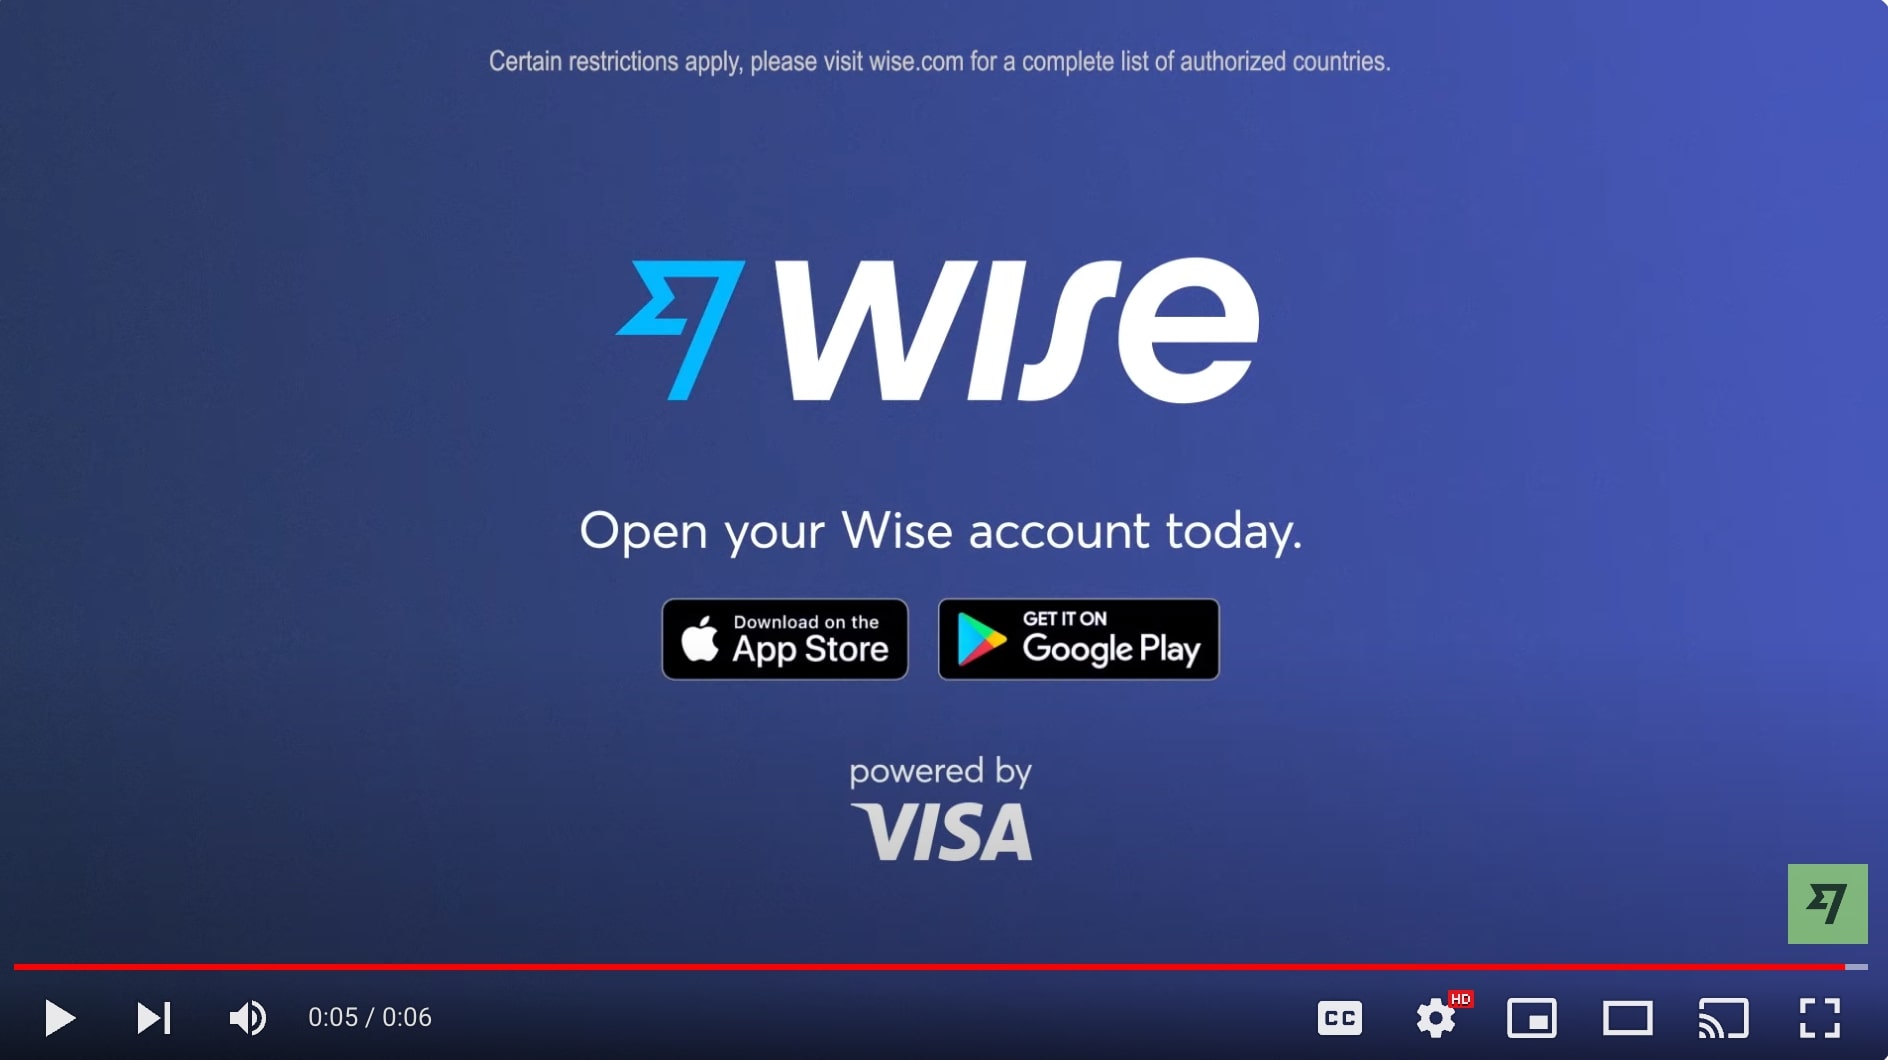 Wise's video ad ends with "open your Wise account today" CTA